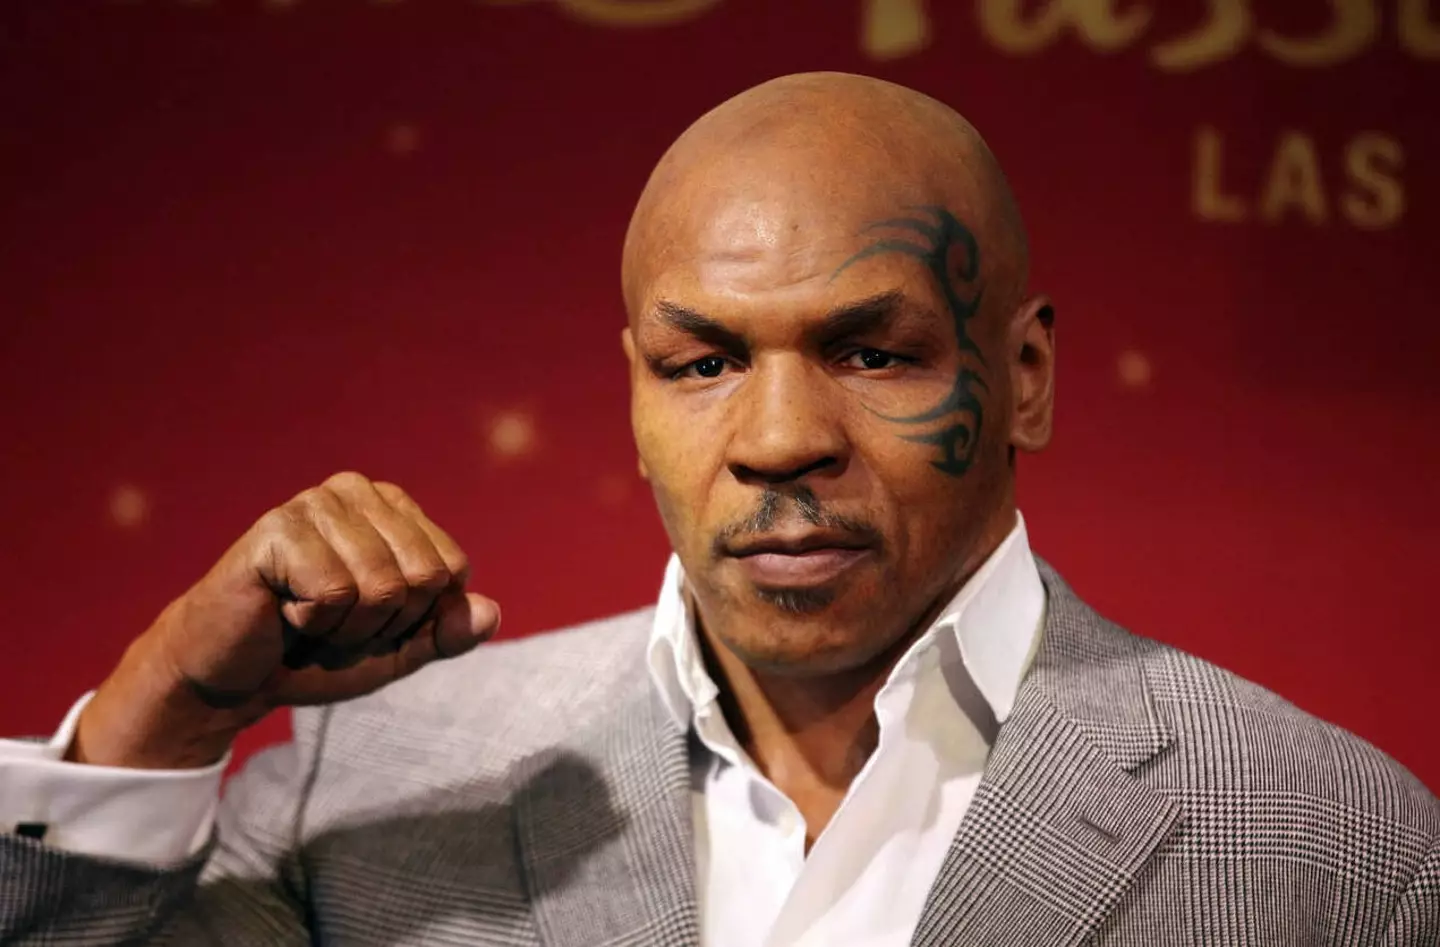 Tyson made headlines this week after appearing on Joe Rogan's podcast.